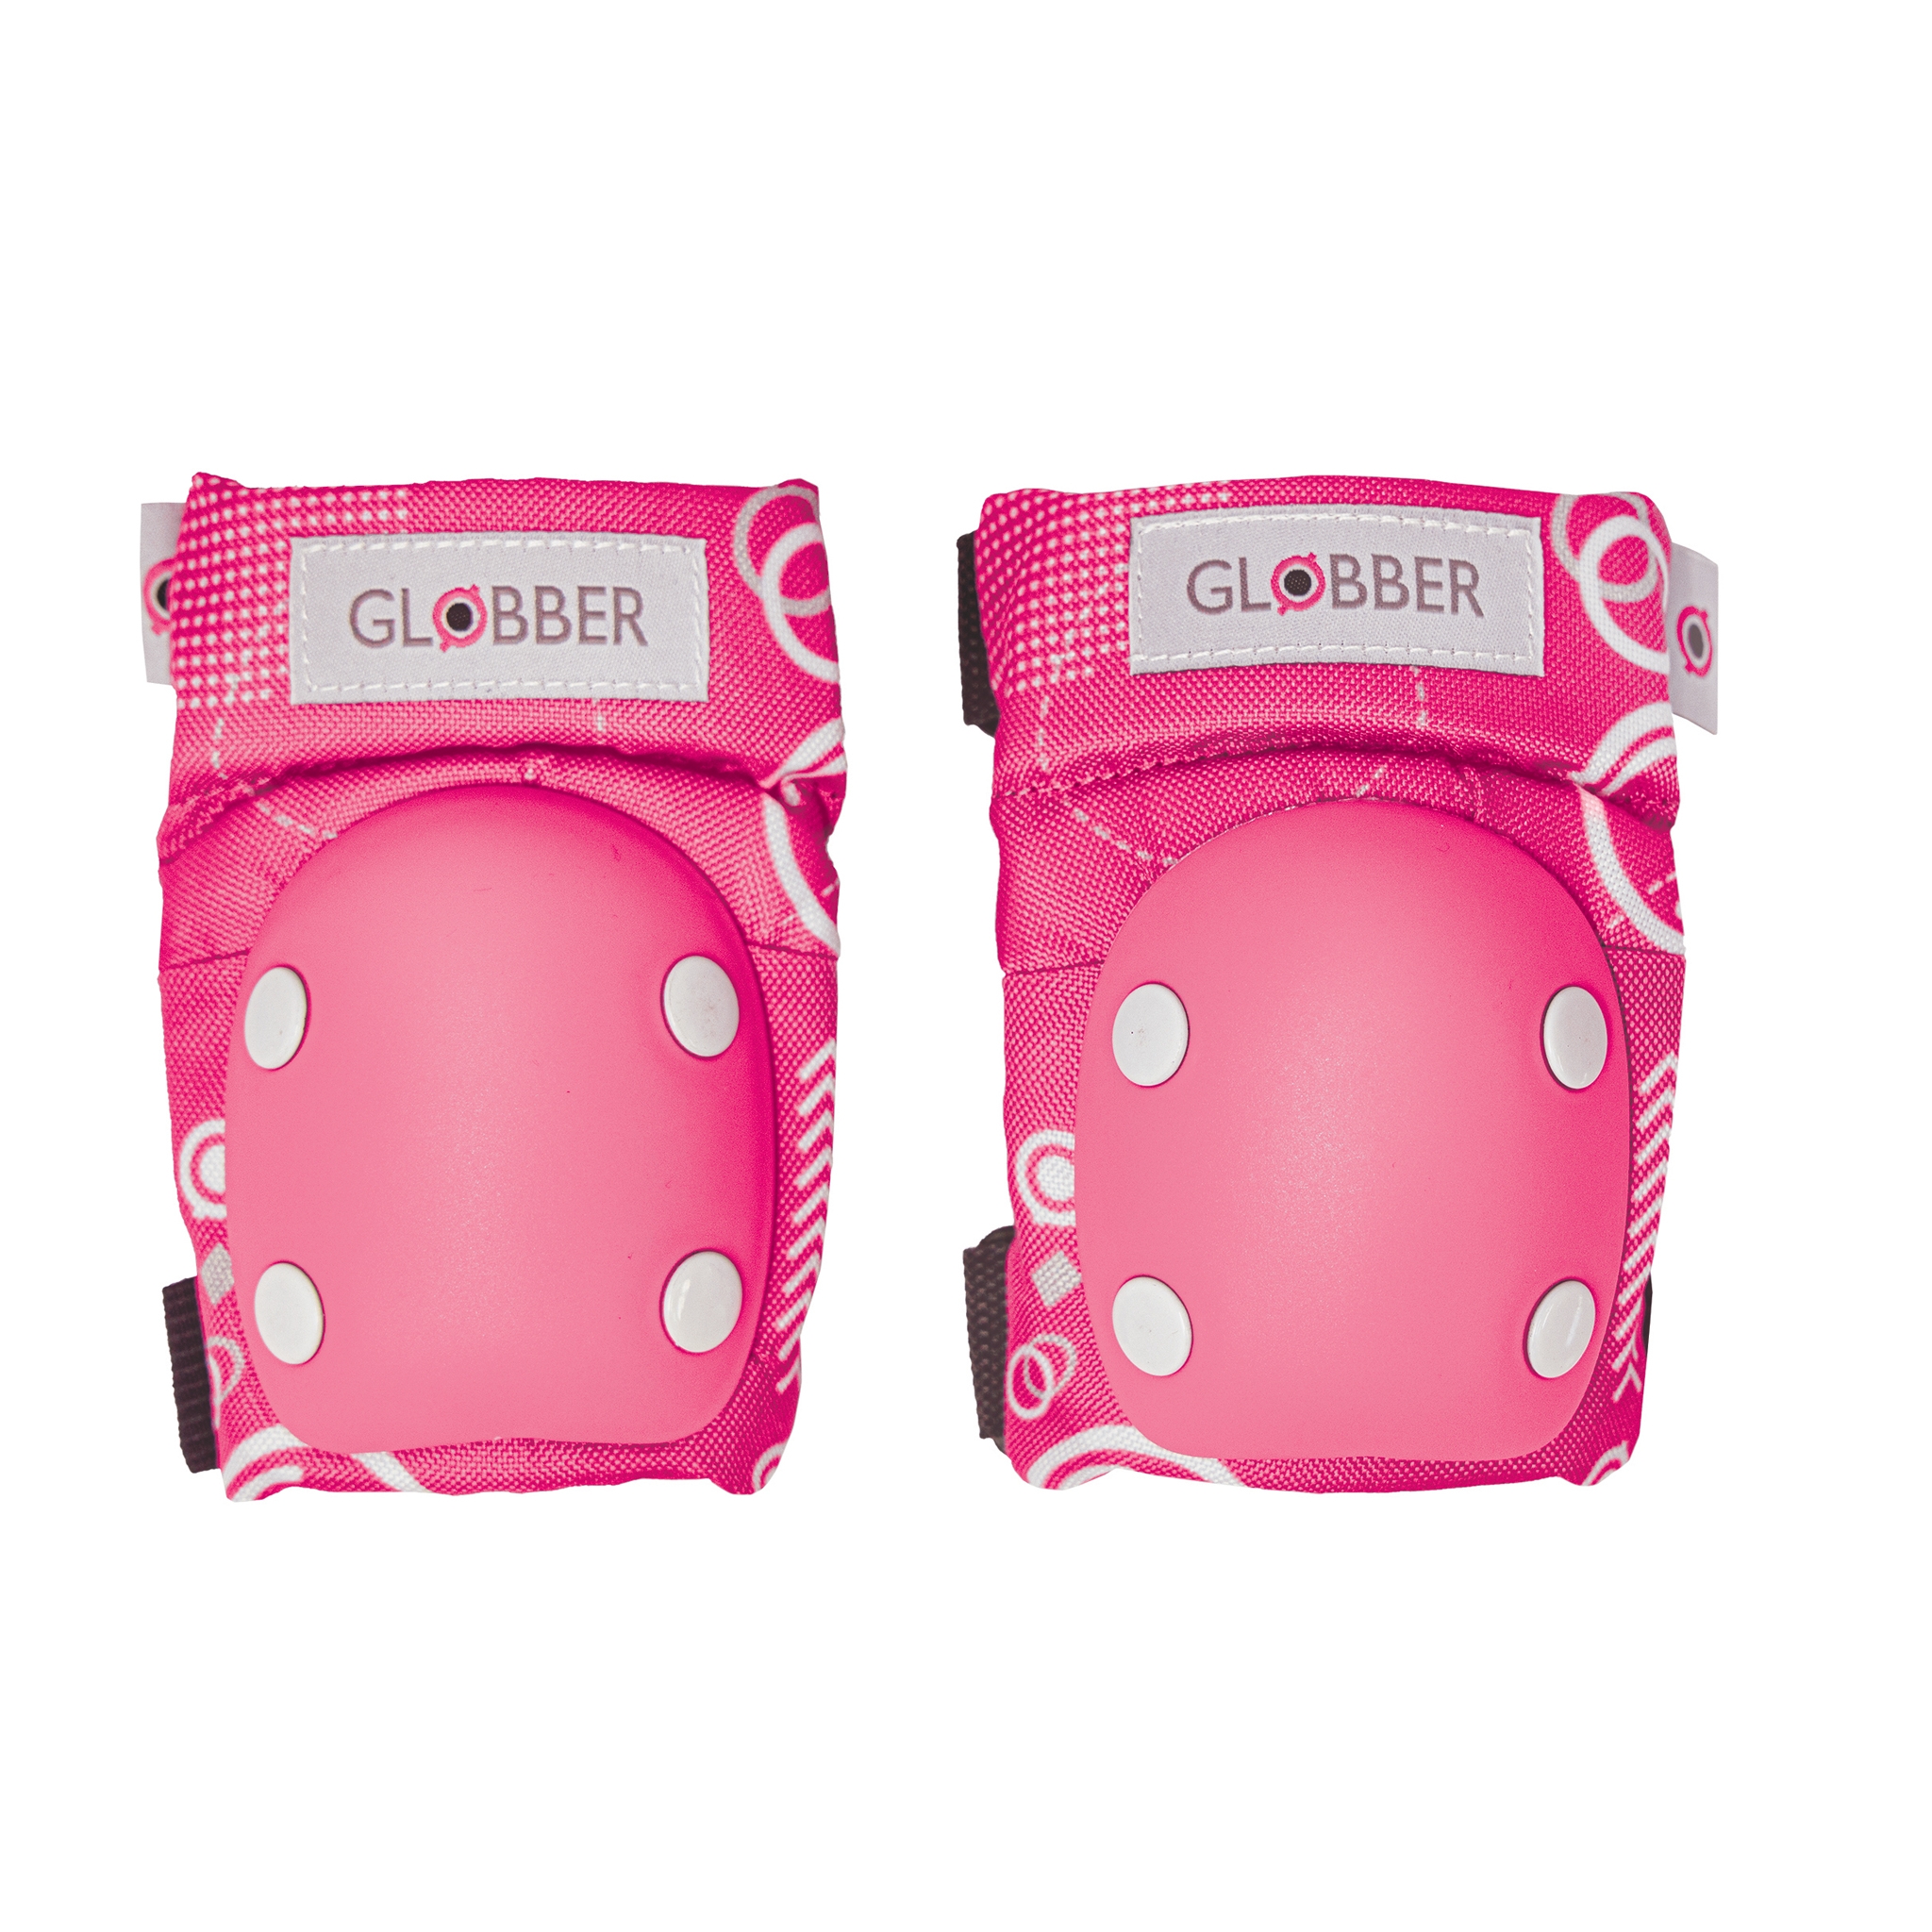 printed protective gear for kids - Globber 0